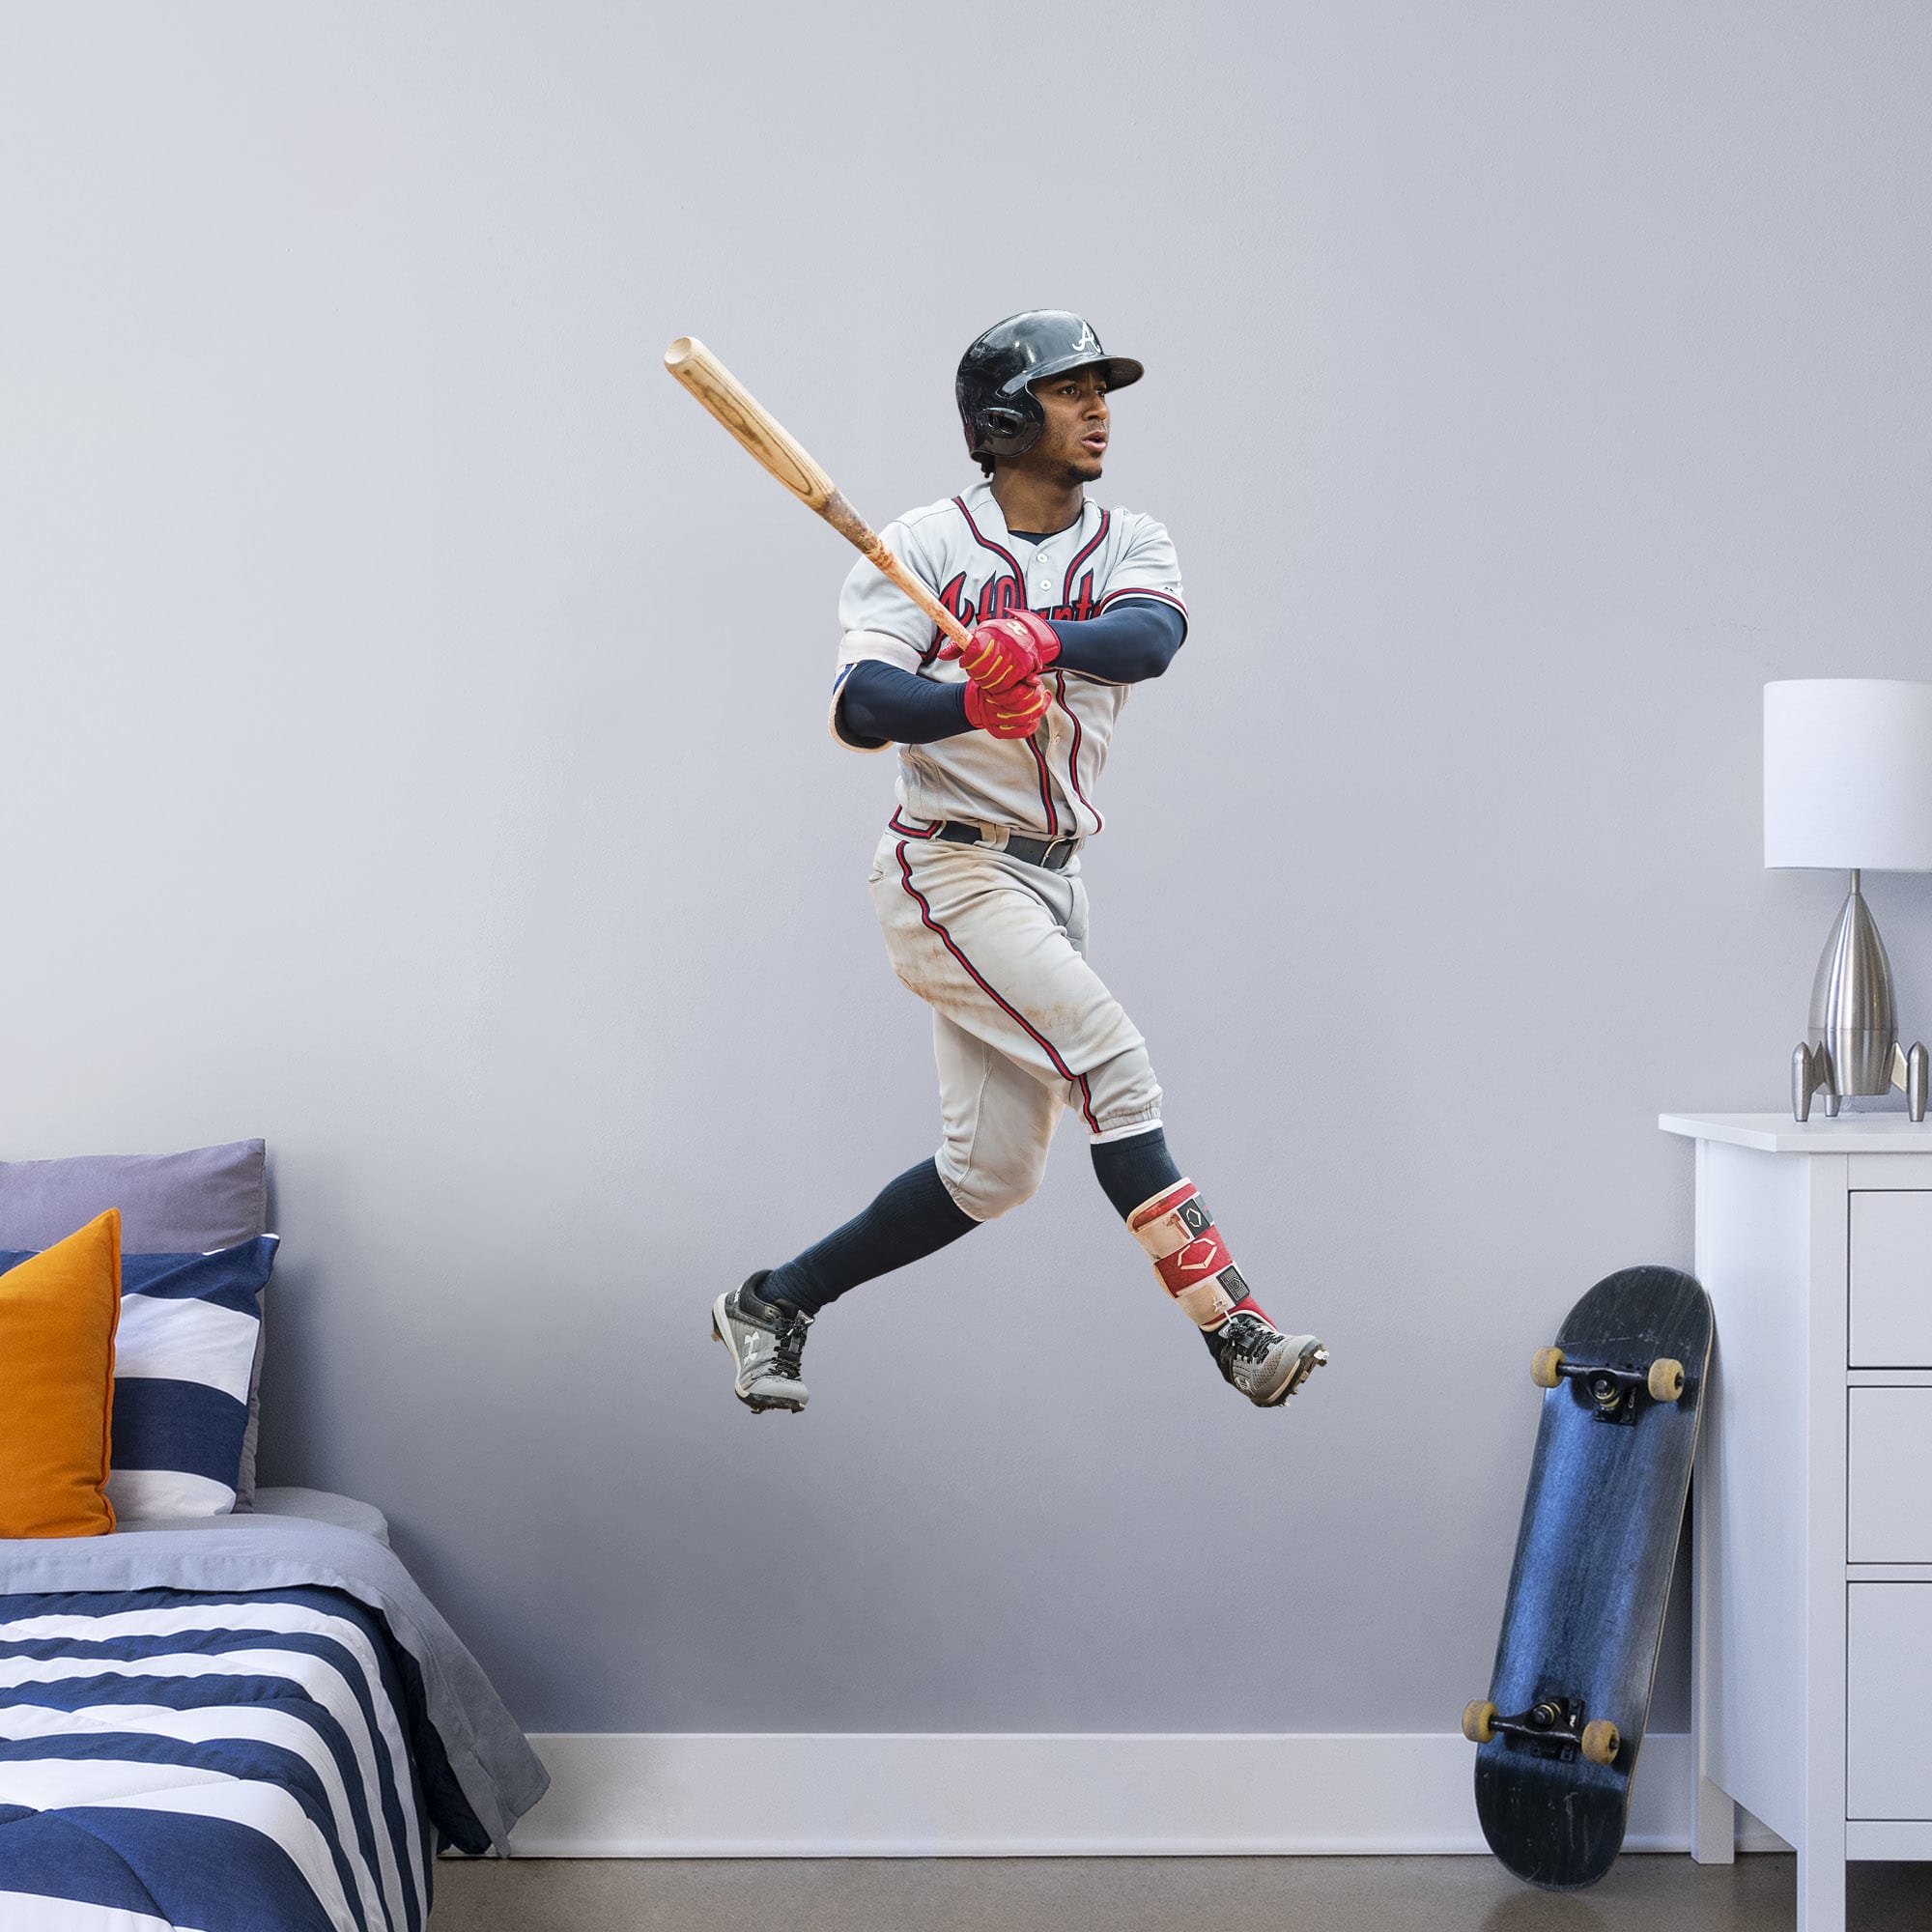 Ozzie Albies for Atlanta Braves - Officially Licensed MLB Removable Wall Decal Giant Athlete + 2 Decals (31"W x 51"H) by Fathead